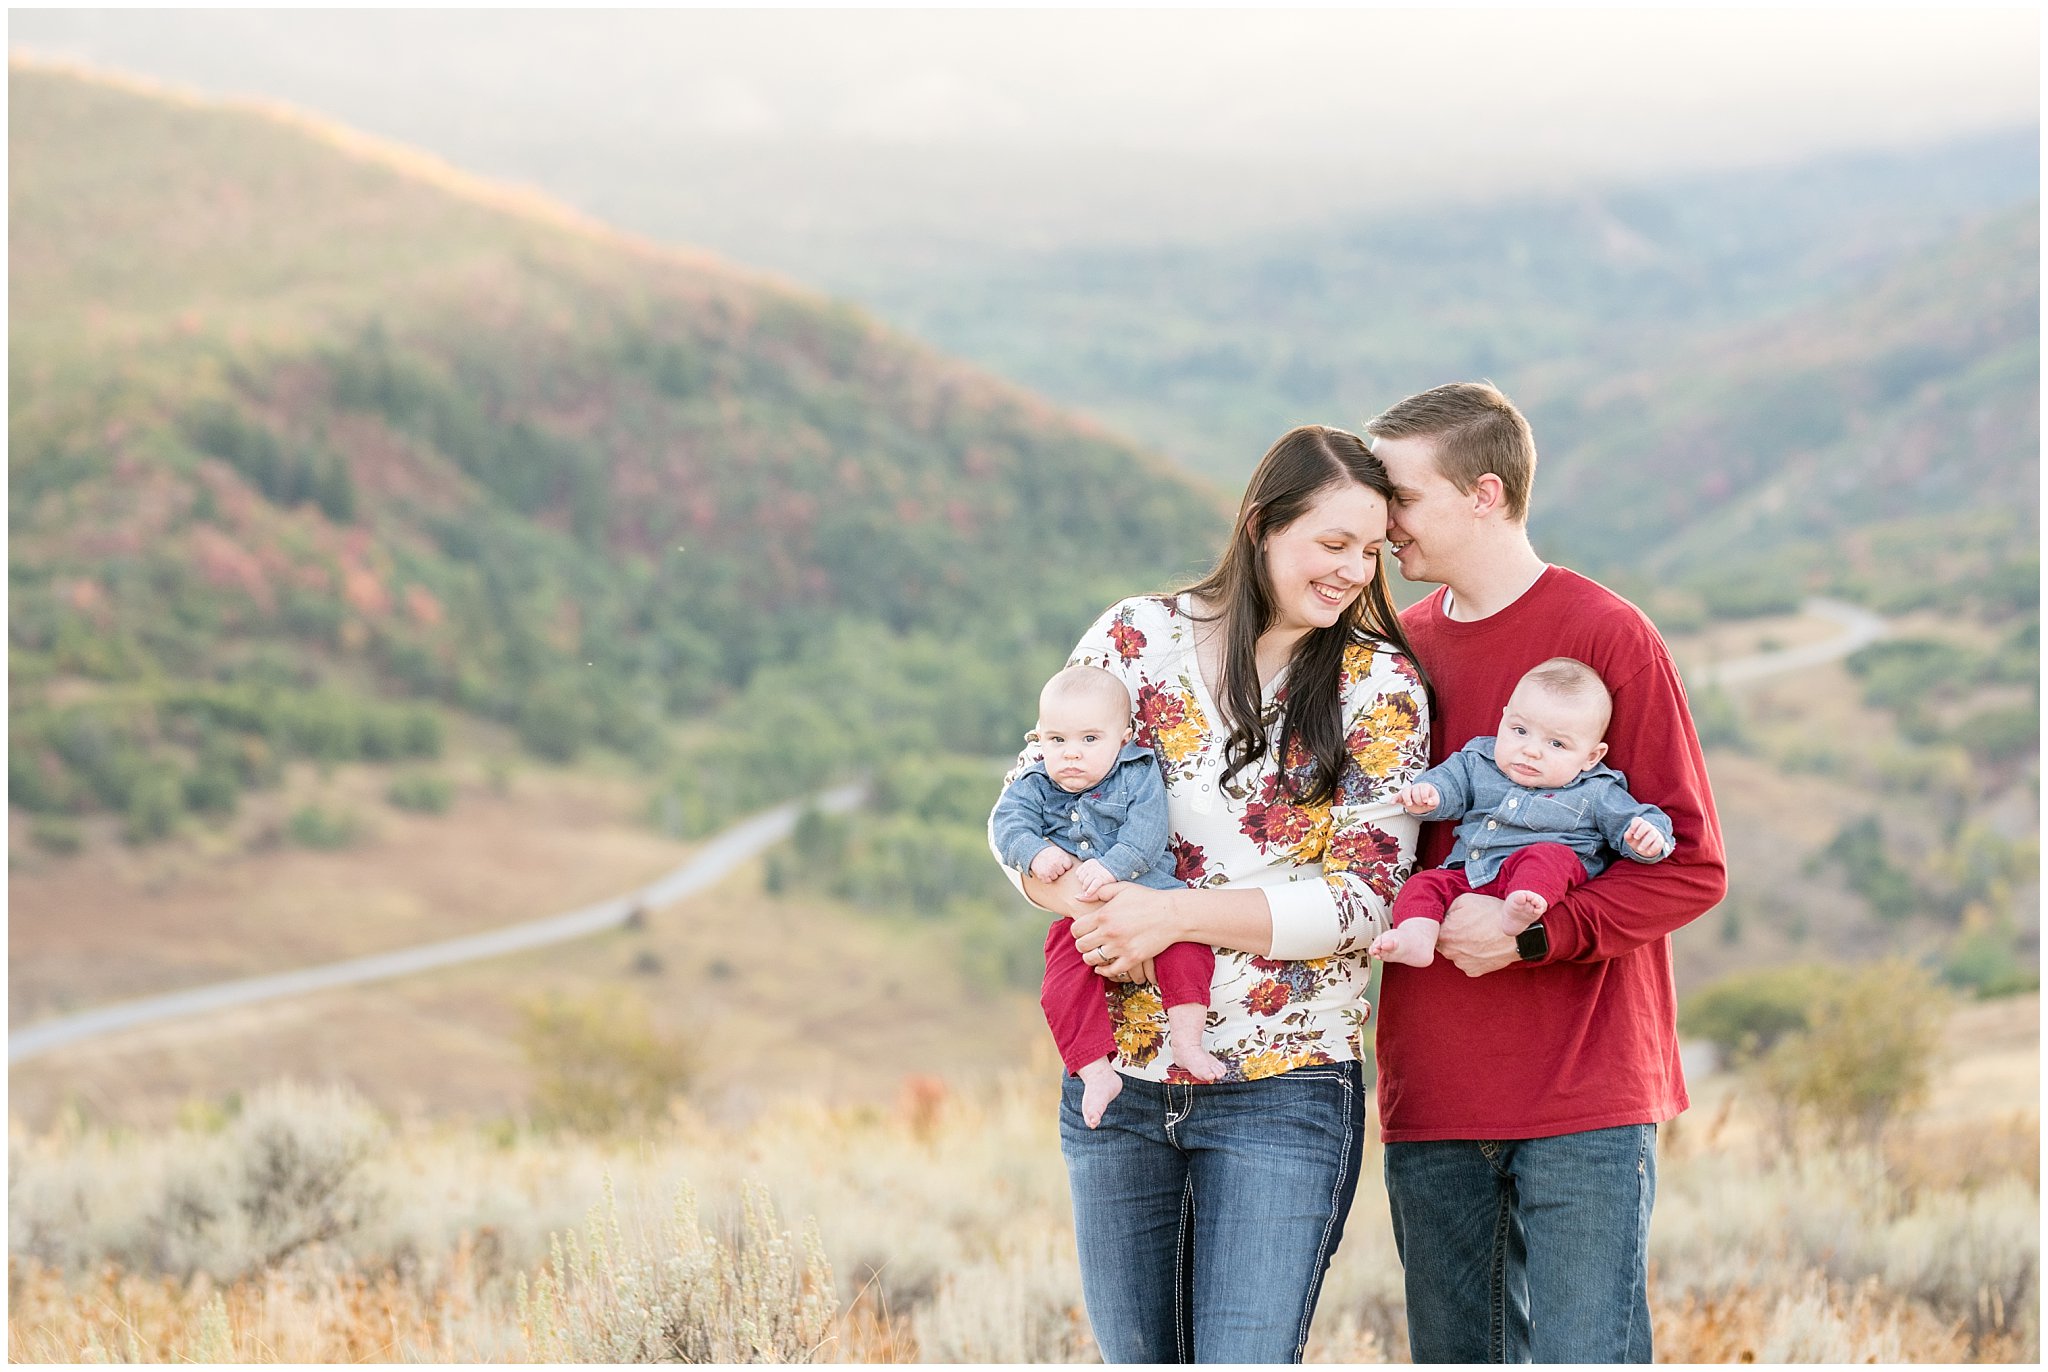 Candid fall family picture in the mountains | Fall Family Pictures at Snowbasin | Jessie and Dallin Photography